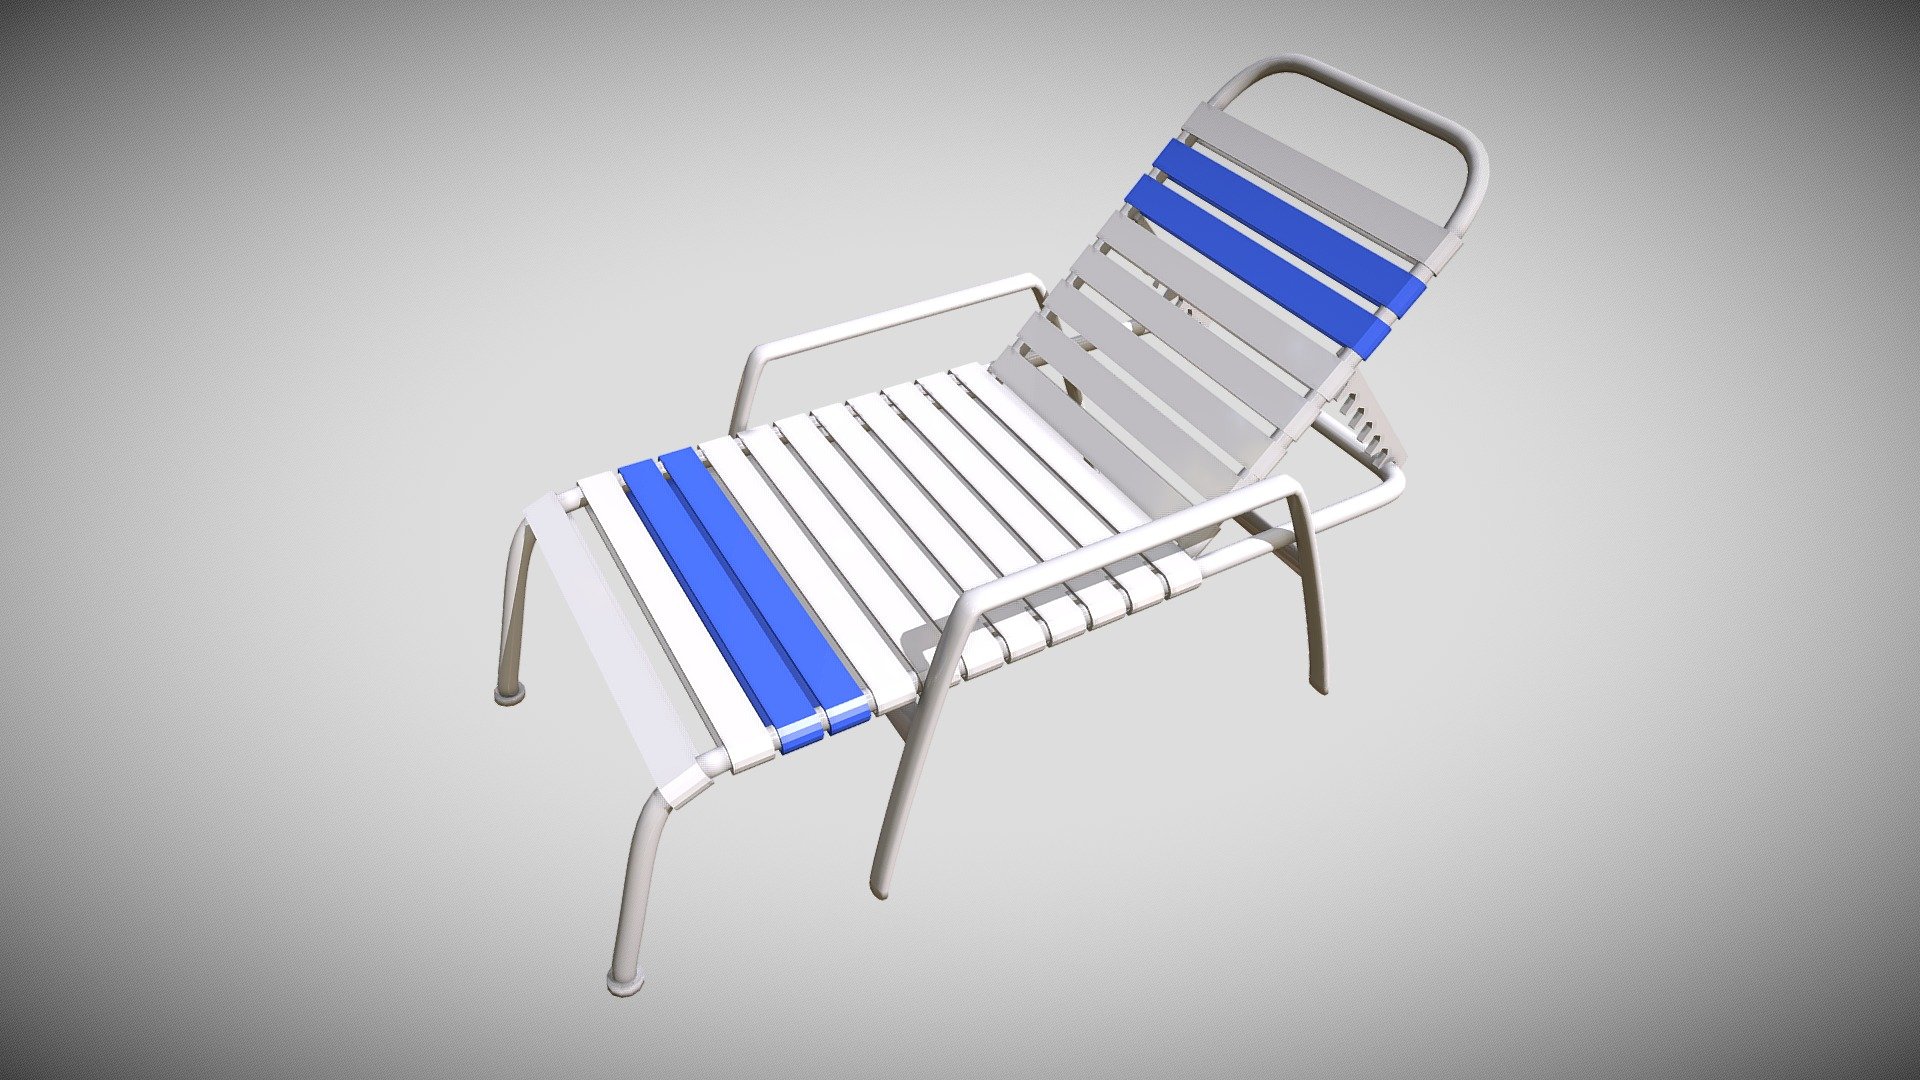 Pool Lounge Chair Asset. Free to use for any project - Pool Lounge Chair - Download Free 3D model by CadmiumCoffee (@bsishir) 3d model